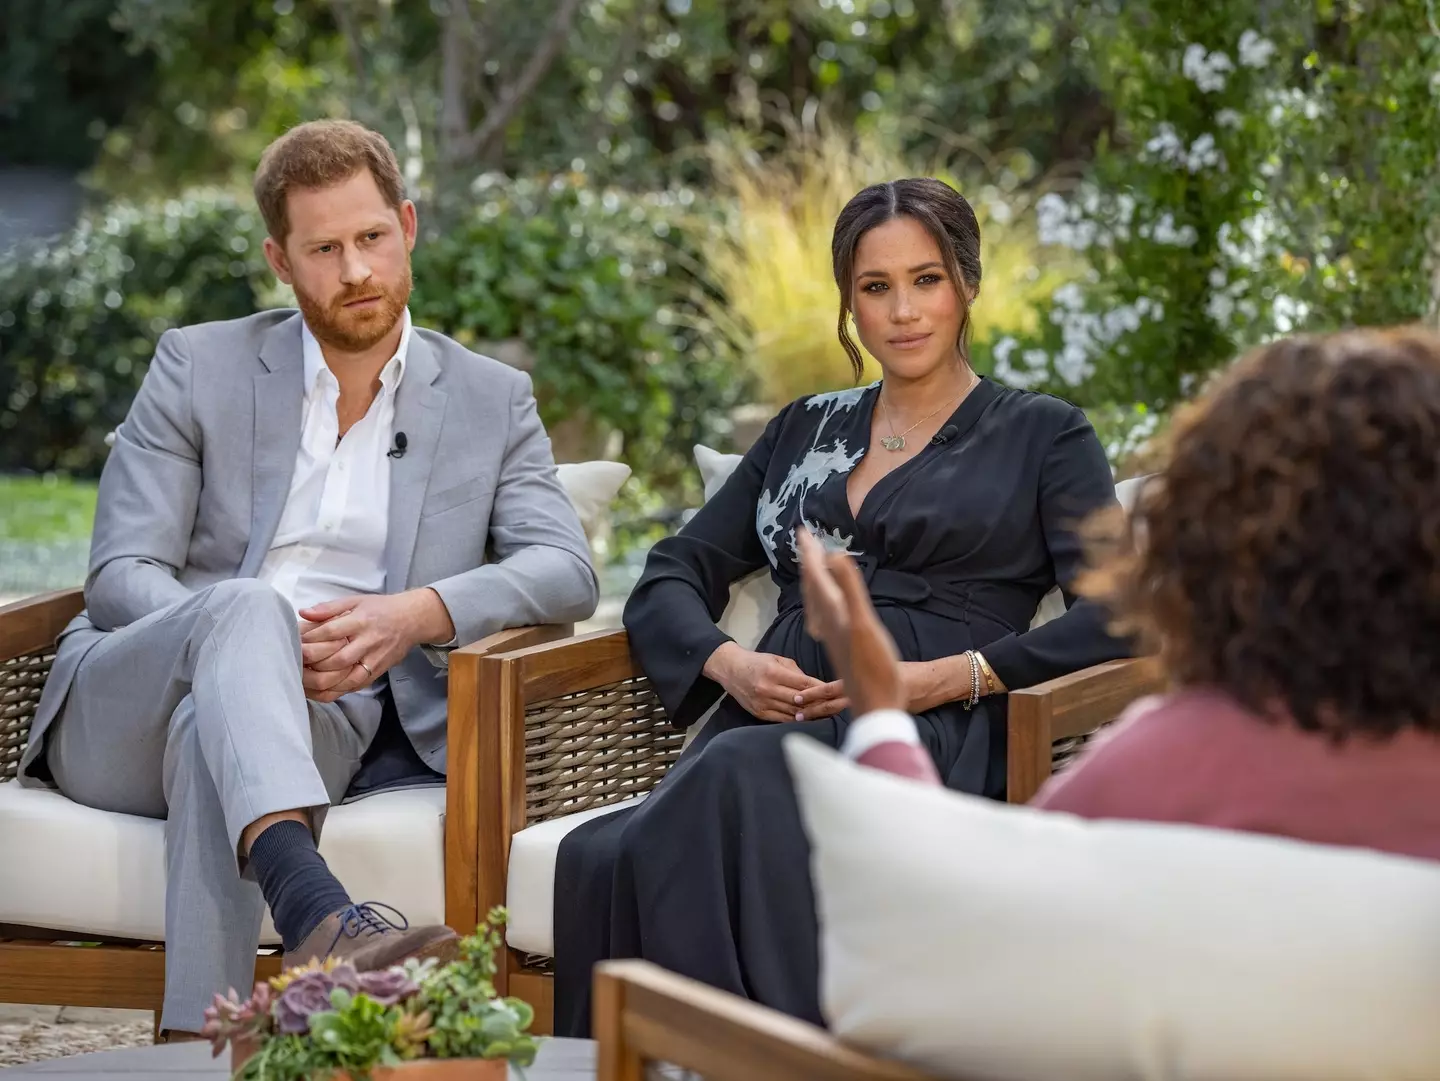 Prince Harry and Meghan Markle spoke openly about race and mental health in their interview with Oprah this year (